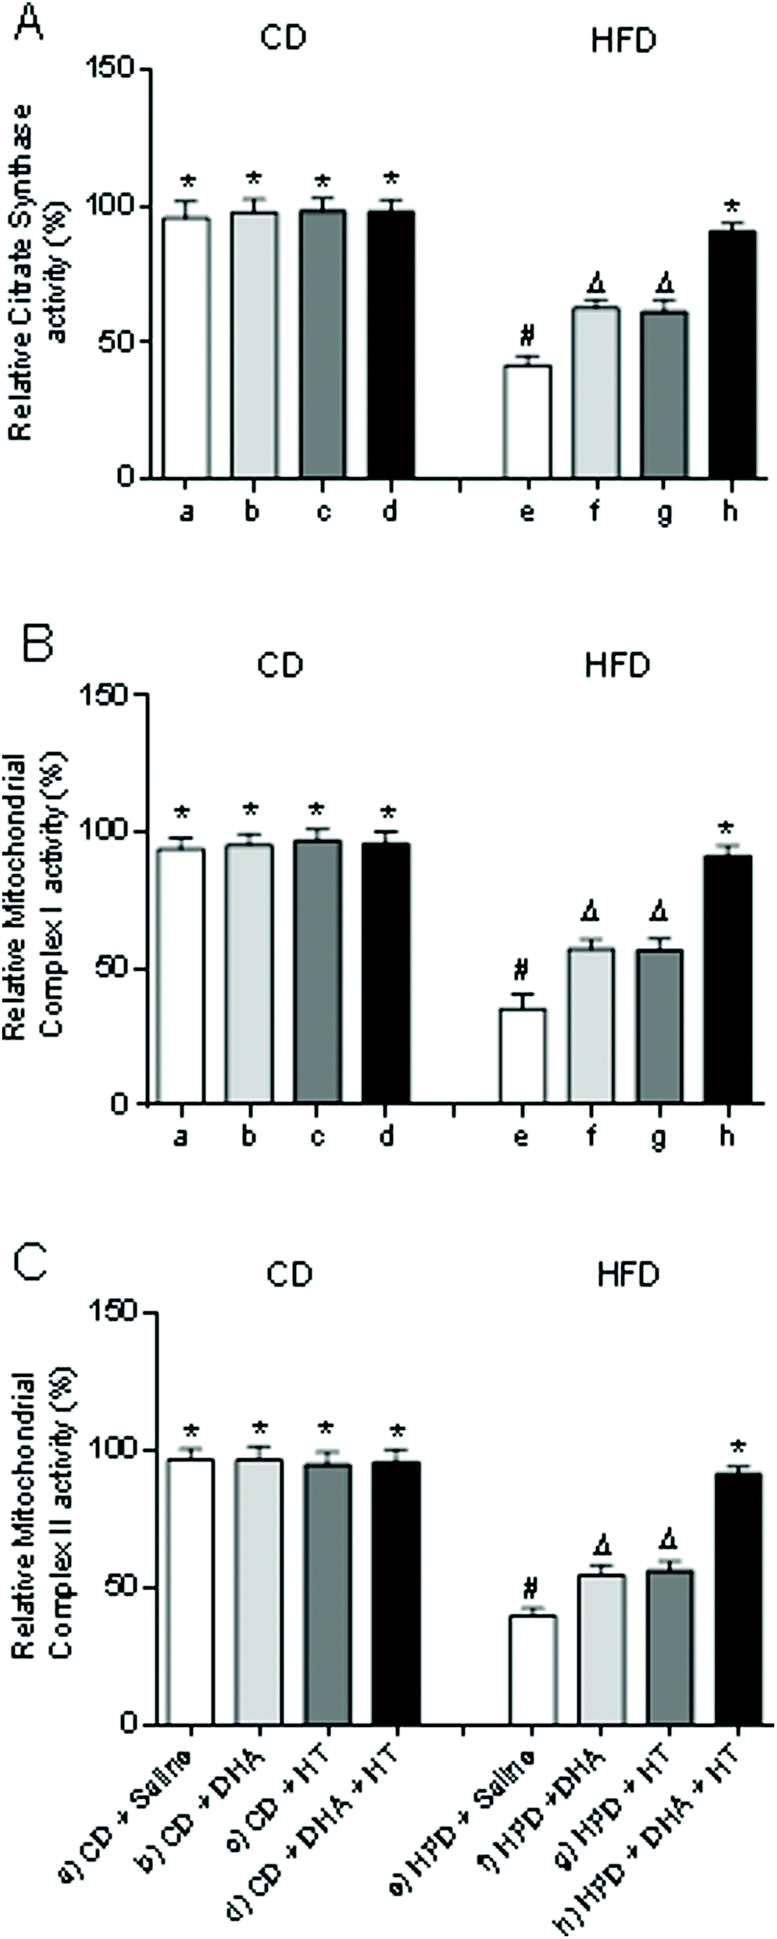 The Metabolic Dysfunction Of White Adipose Tissue Induced In Mice By A High Fat Diet Is Abrogated By Co Administration Of Docosahexaenoic Acid And Hyd Food Function Rsc Publishing Doi 10 1039 D0fof